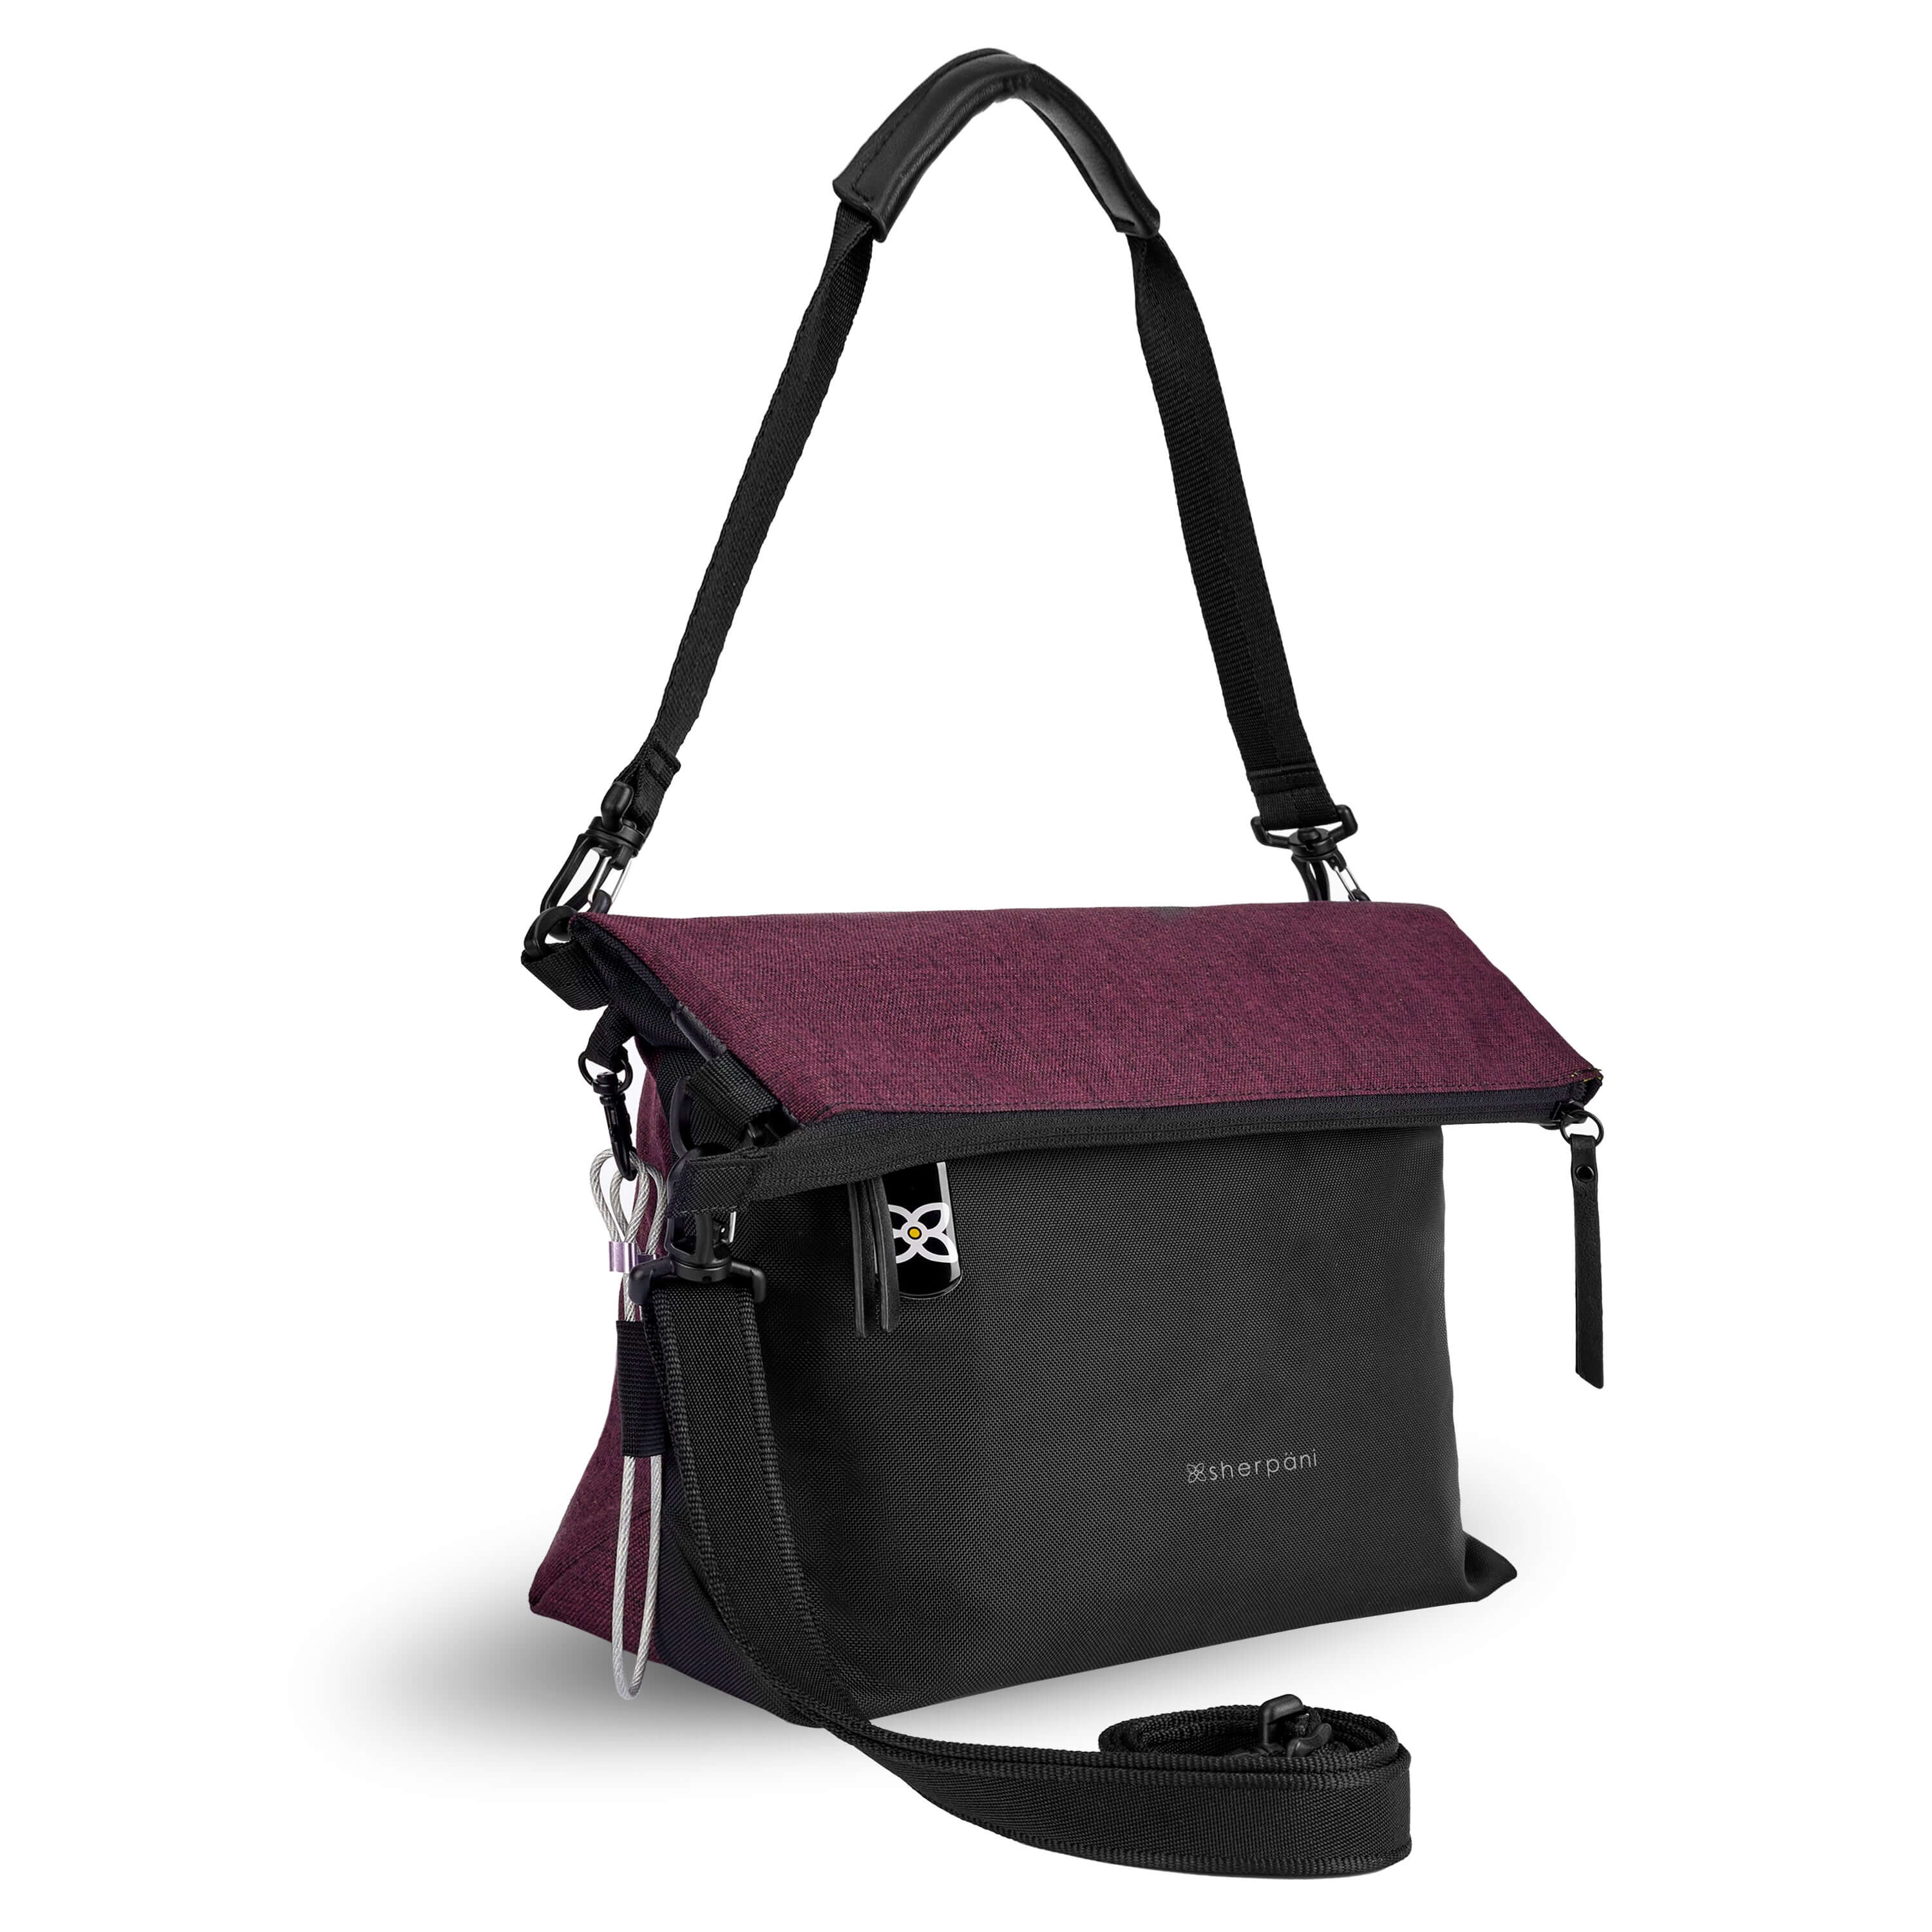 Angled front view of Sherpani&#39;s Anti-Theft bag, the Vale AT in Merlot with vegan leather accents in black. The top is folded over creating a signature overlap look. A chair loop lock is connected to a key fob clip on one side. It has an adjustable/detachable crossbody strap, and a second detachable strap fixed at a shorter length.